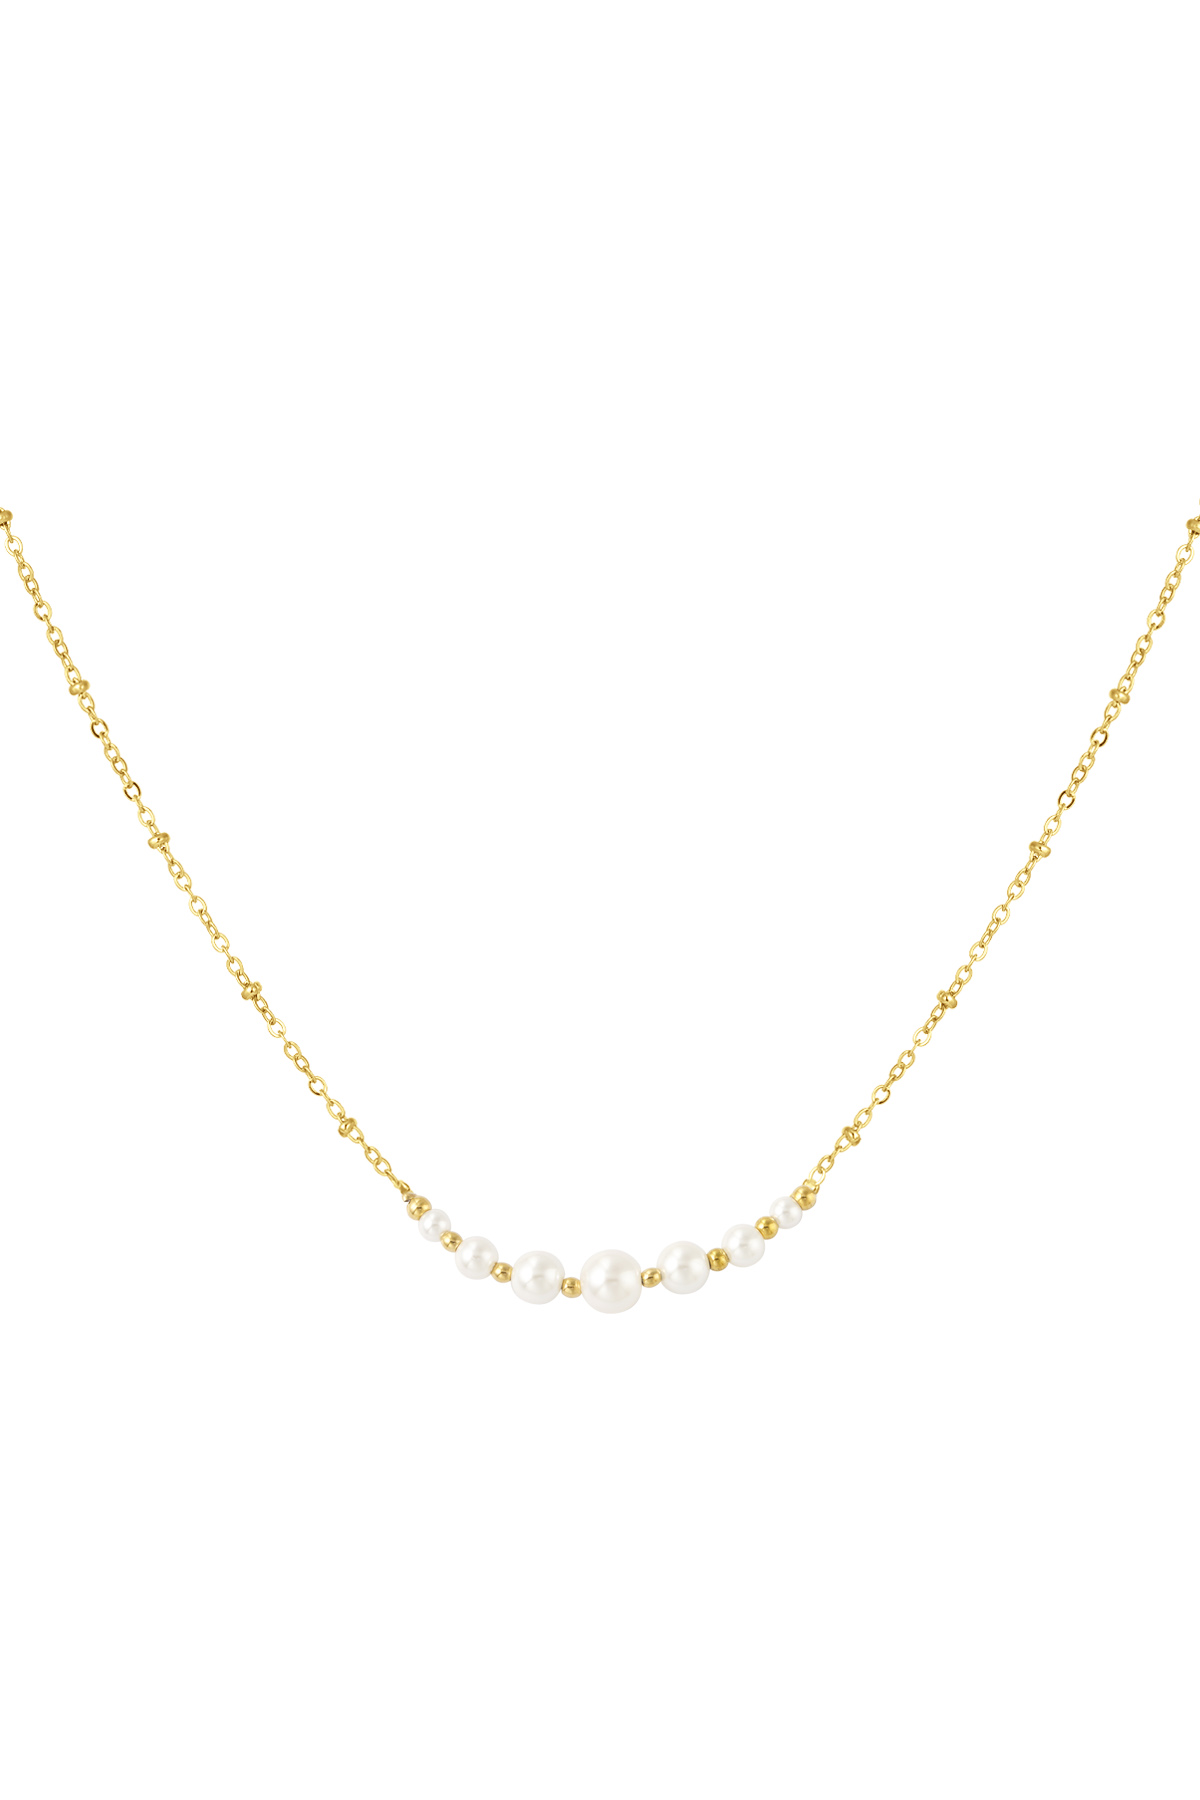 Necklace pearl party - gold h5 